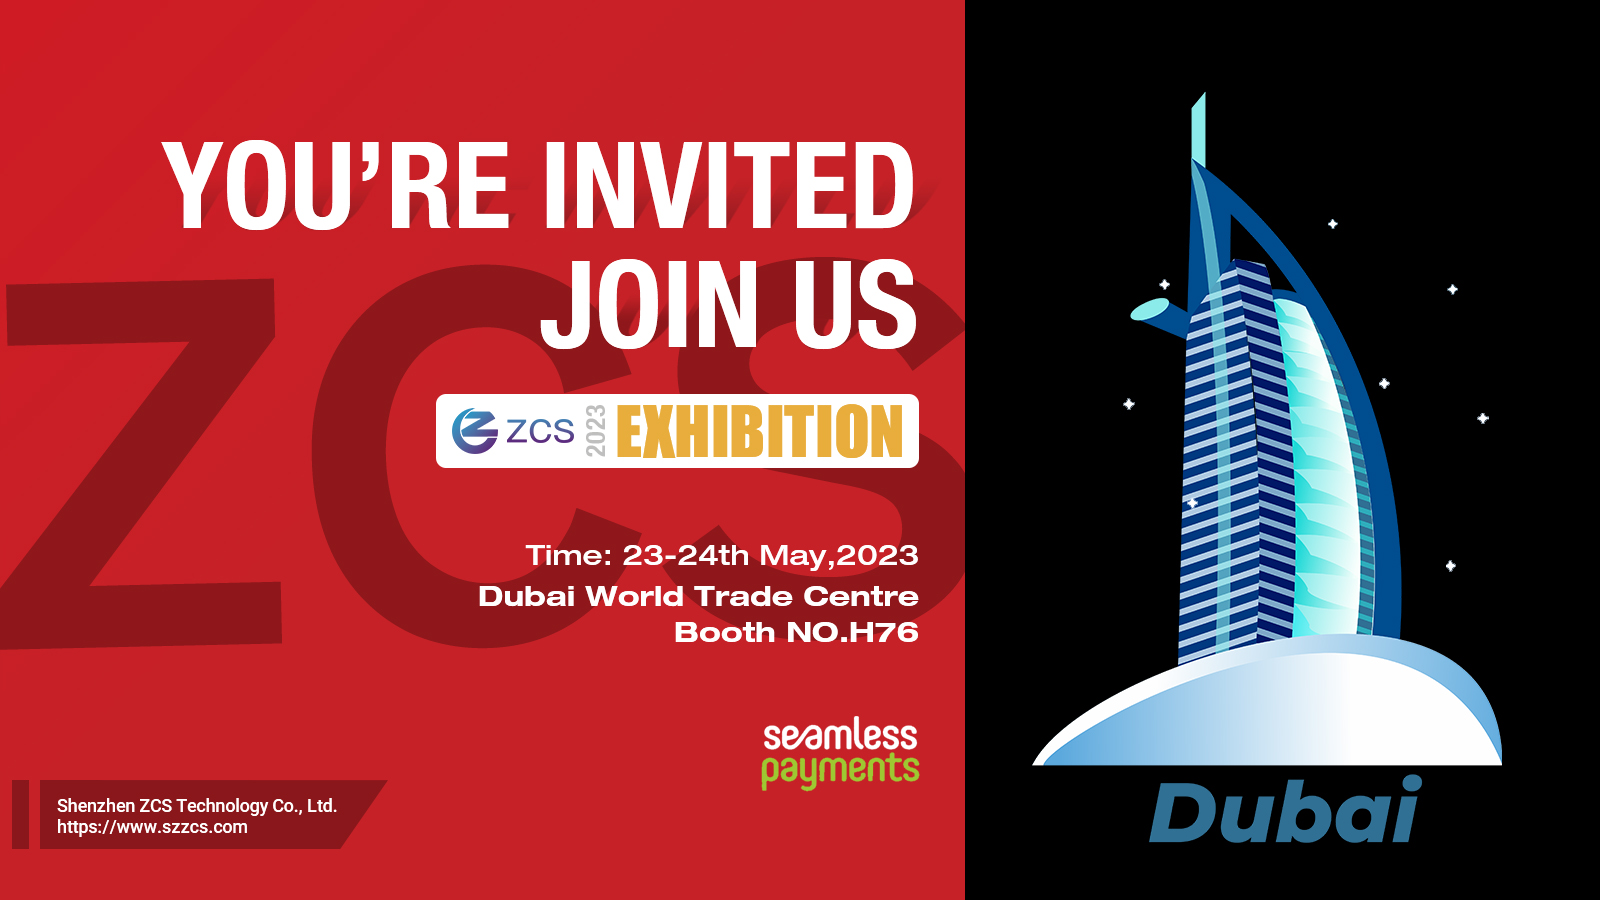  ZCS｜Seamless Payments Exhibition in Dubai, May 23-24, 2023